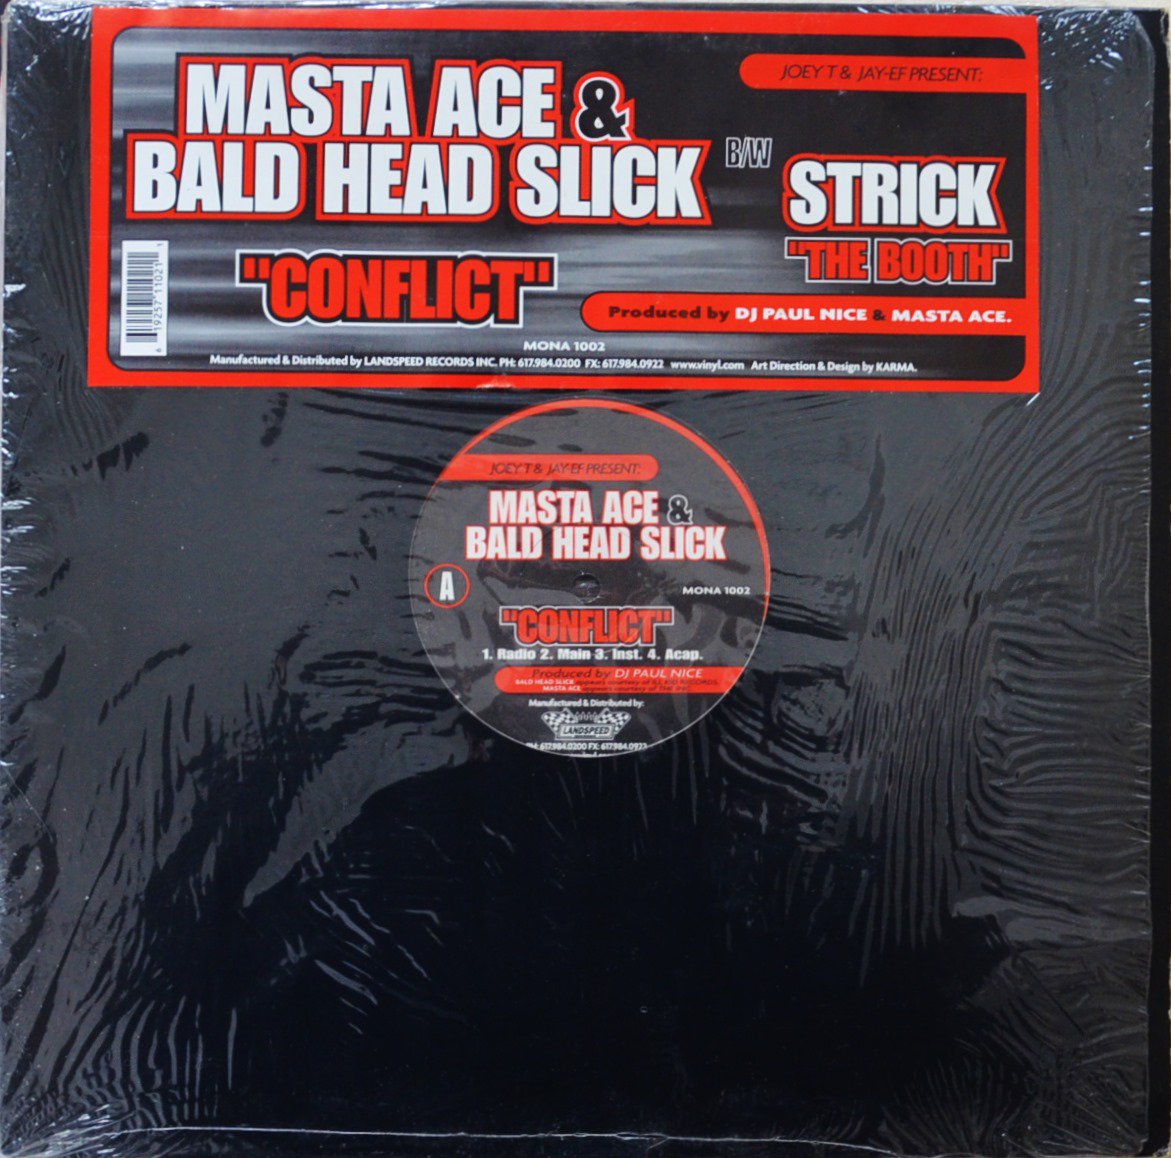 MASTA ACE & BALD HEAD SLICK / STRICK / CONFLICT (PROD BY DJ PAUL NICE) / THE BOOTH (12